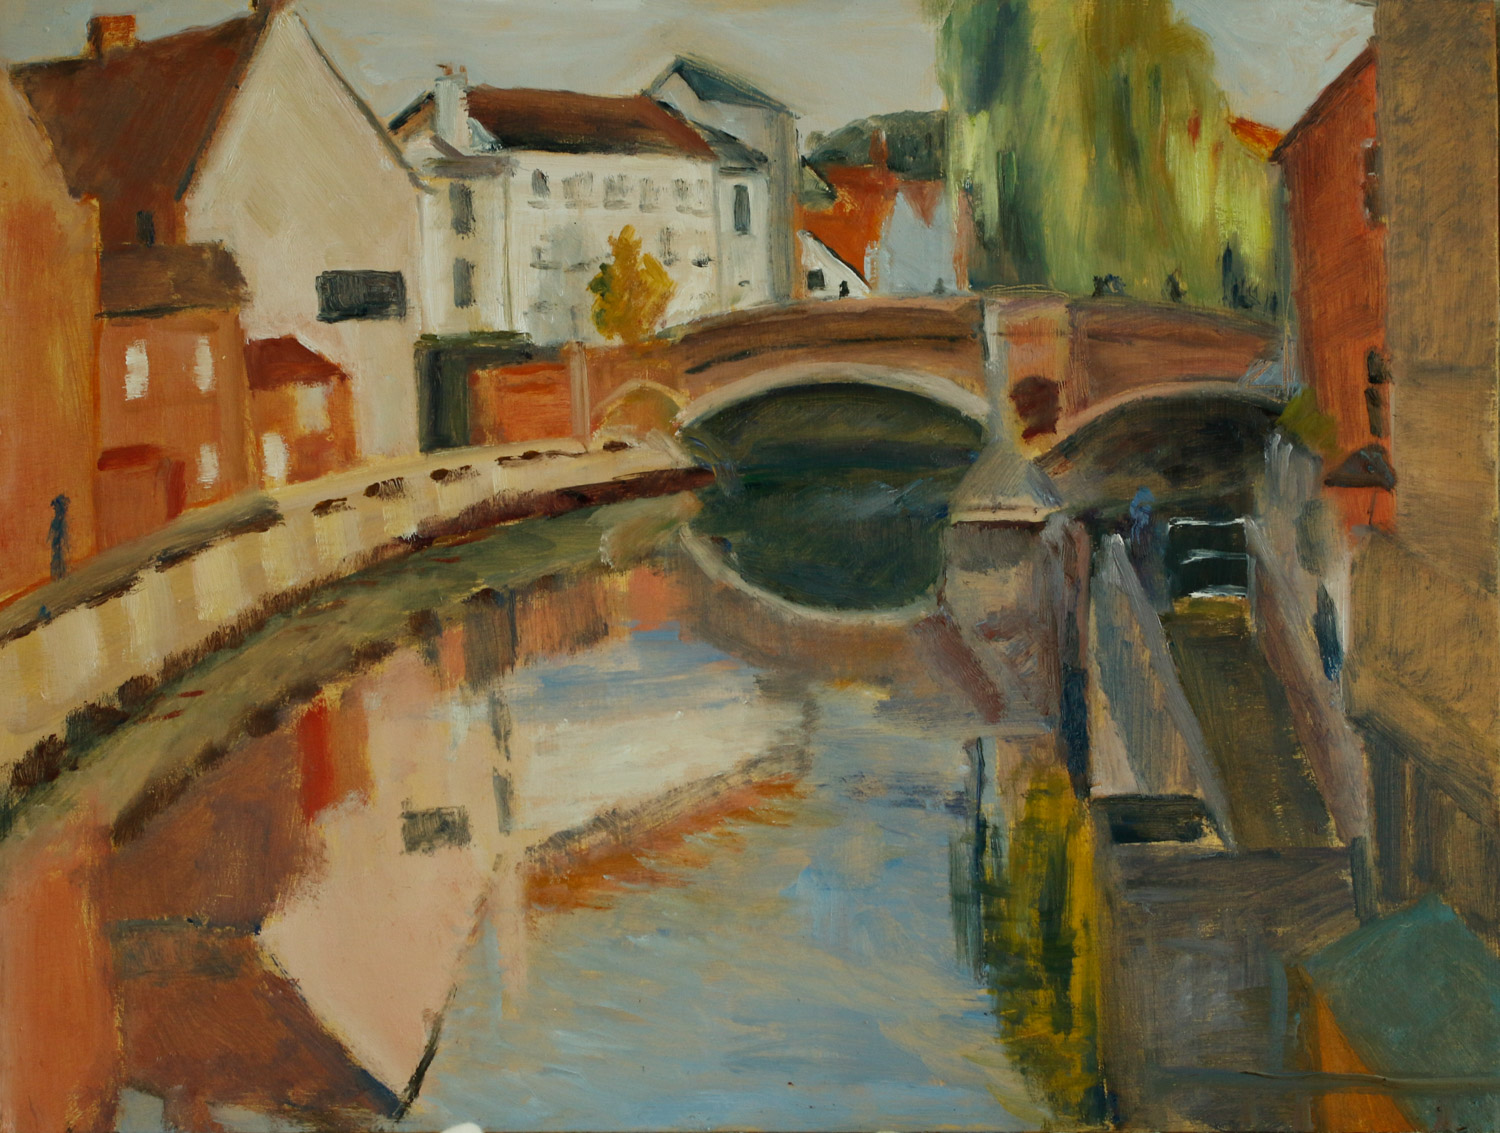 Artist-Mary-MacCarthy-Reflections-£200-12x16-Oil-on-Board-at-Paint-Out-Norwich-2015-photo-by-Mark-Ivan-Benfield-6092-1